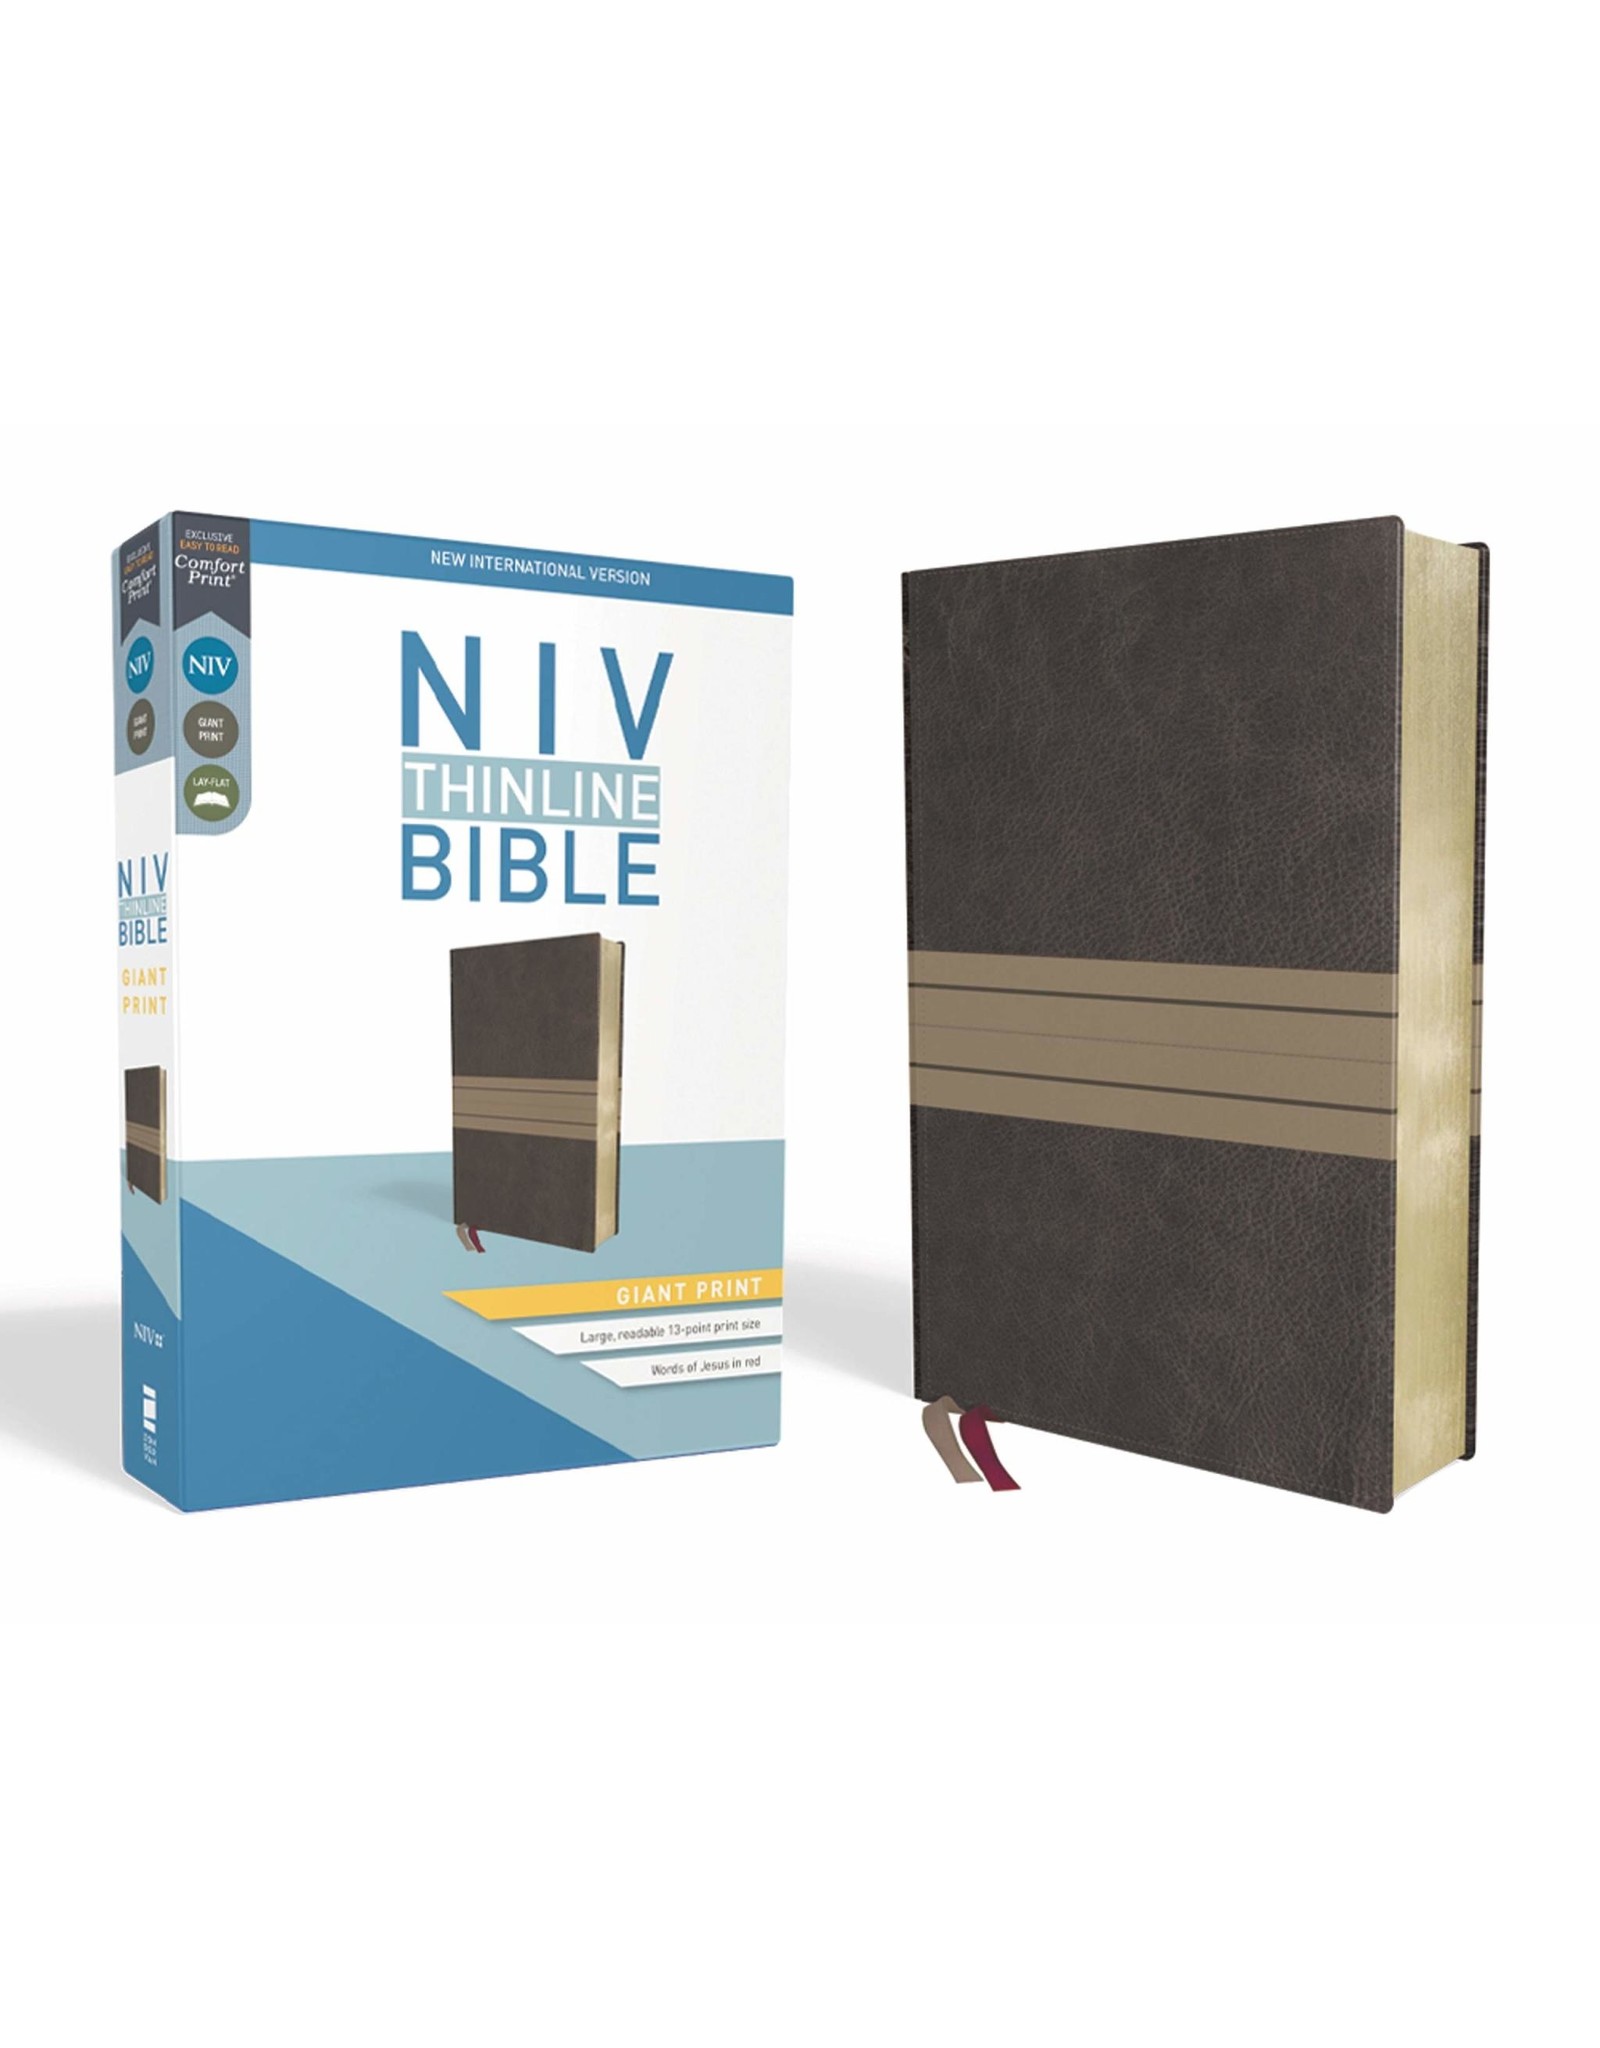 NIV Thinline Bible, Giant Print, Imitation Leather, Brown/Tan, Red Letter Edition